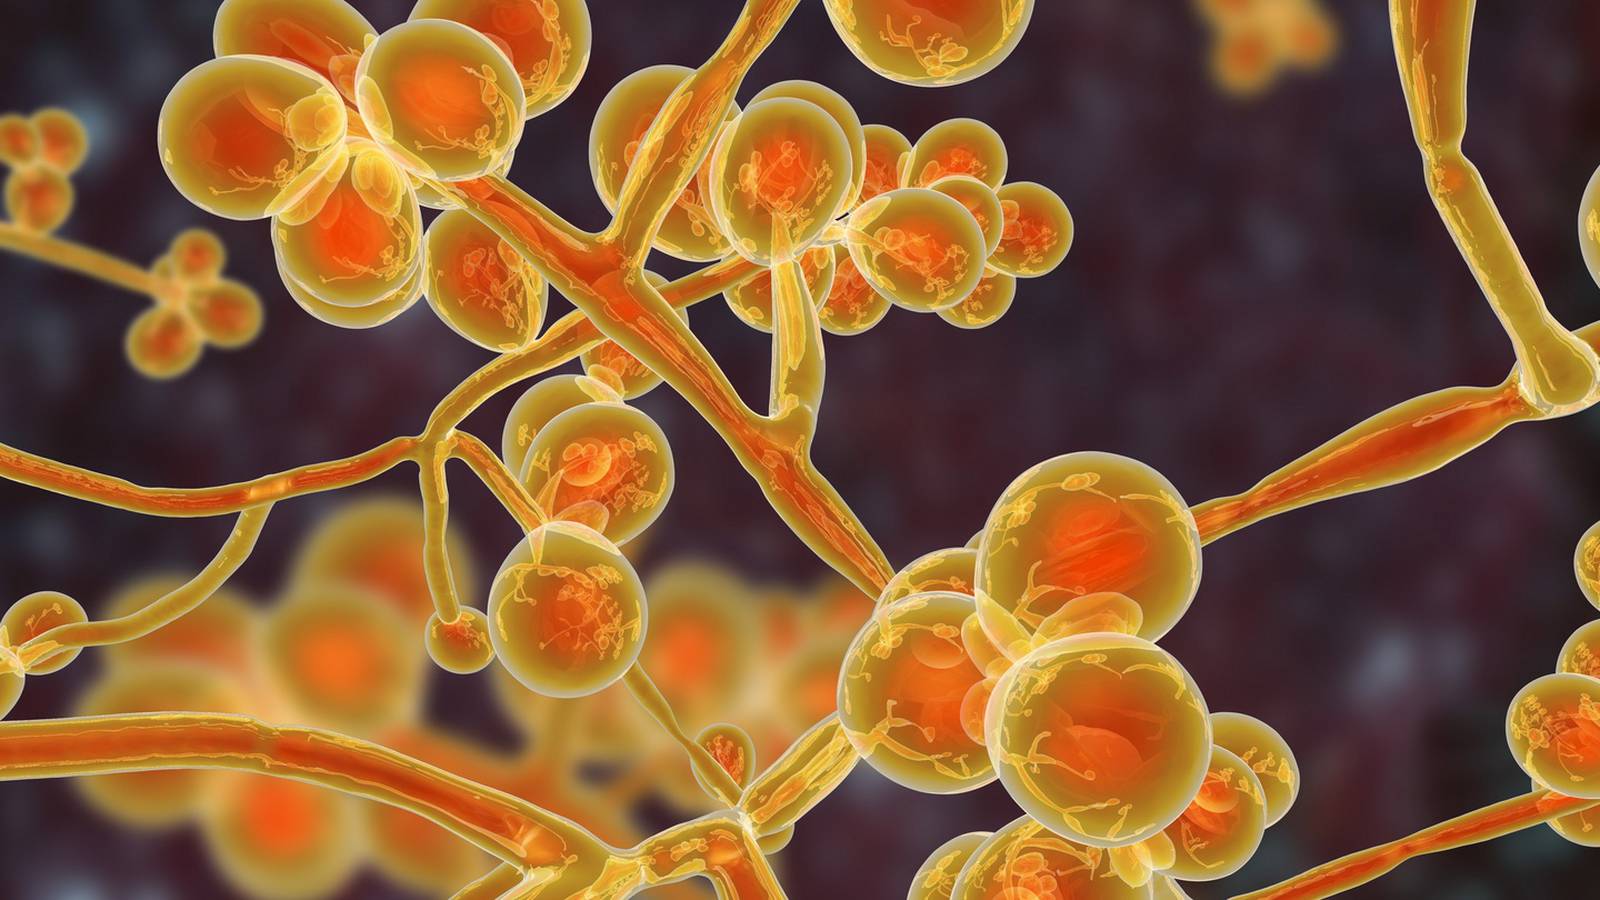 Yeast of burden: deadly new strain of fungal infection has scientists ...